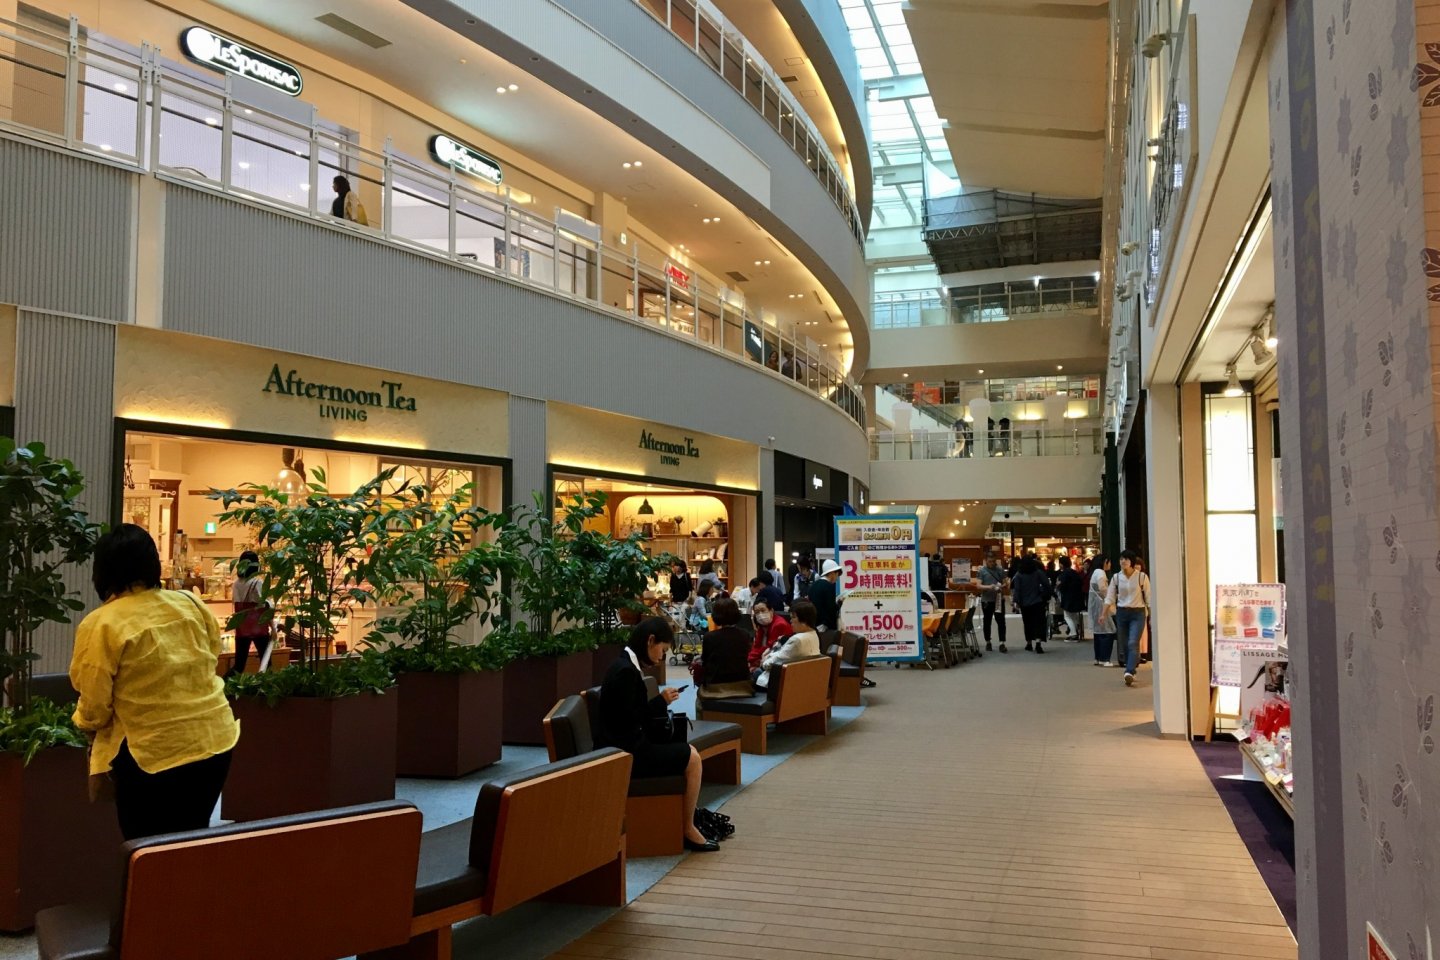 Inside the three story shopping complex